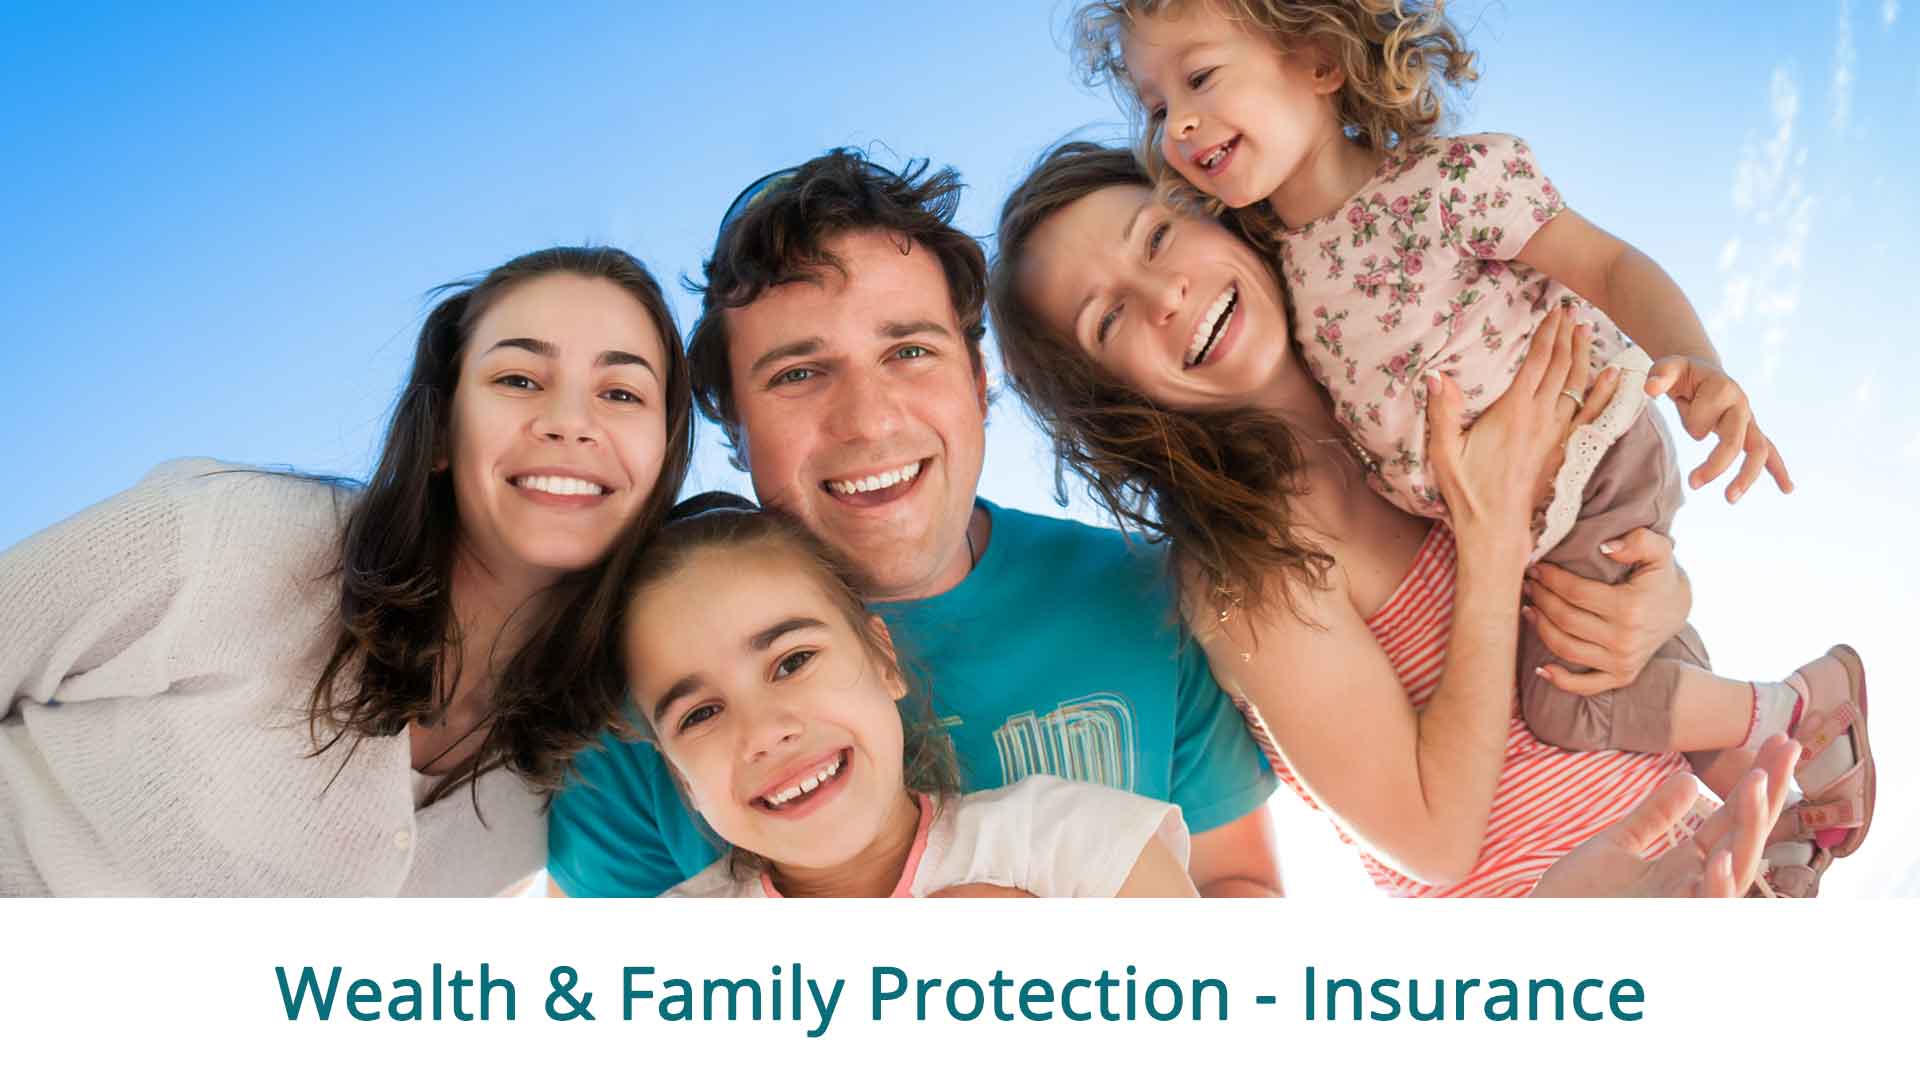 Murray-Mallee-Financial-Planning-Advice-2-Wealth-&-Family-Protection-Insurance